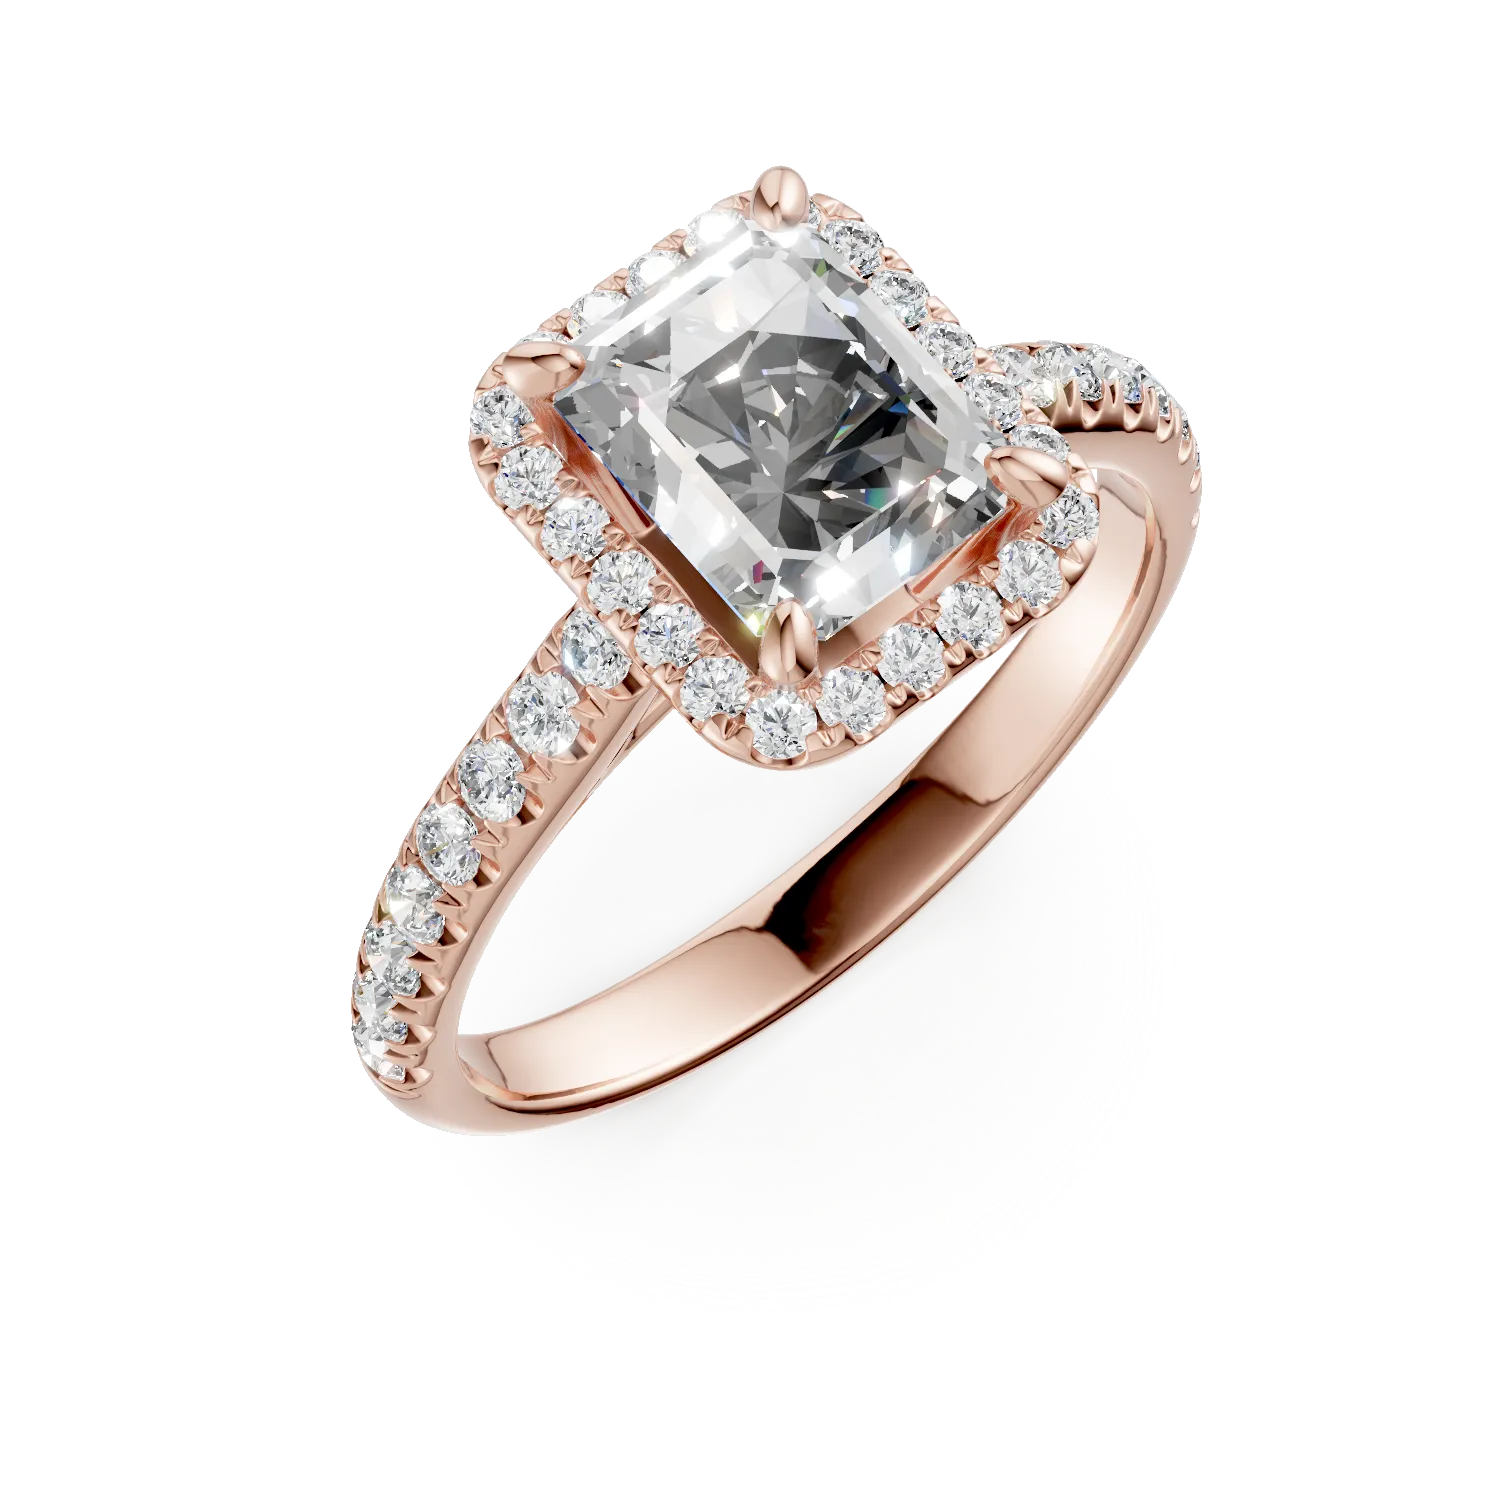 Rose gold engagement ring with 1.5ct diamond and 0.4ct diamonds